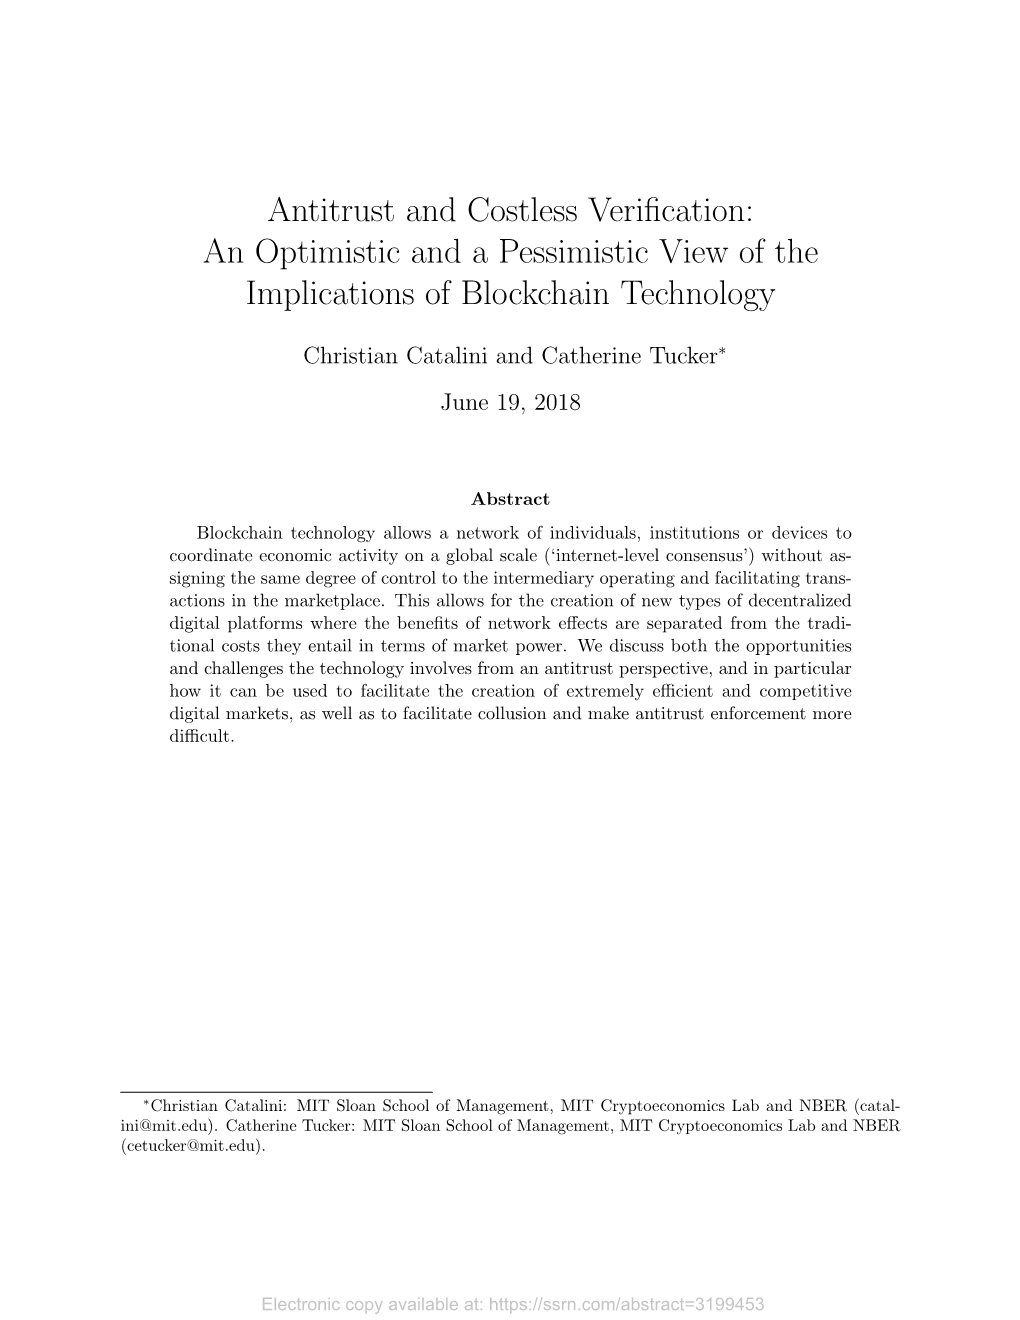 Antitrust and Costless Verification: an Optimistic and a Pessimistic View Of